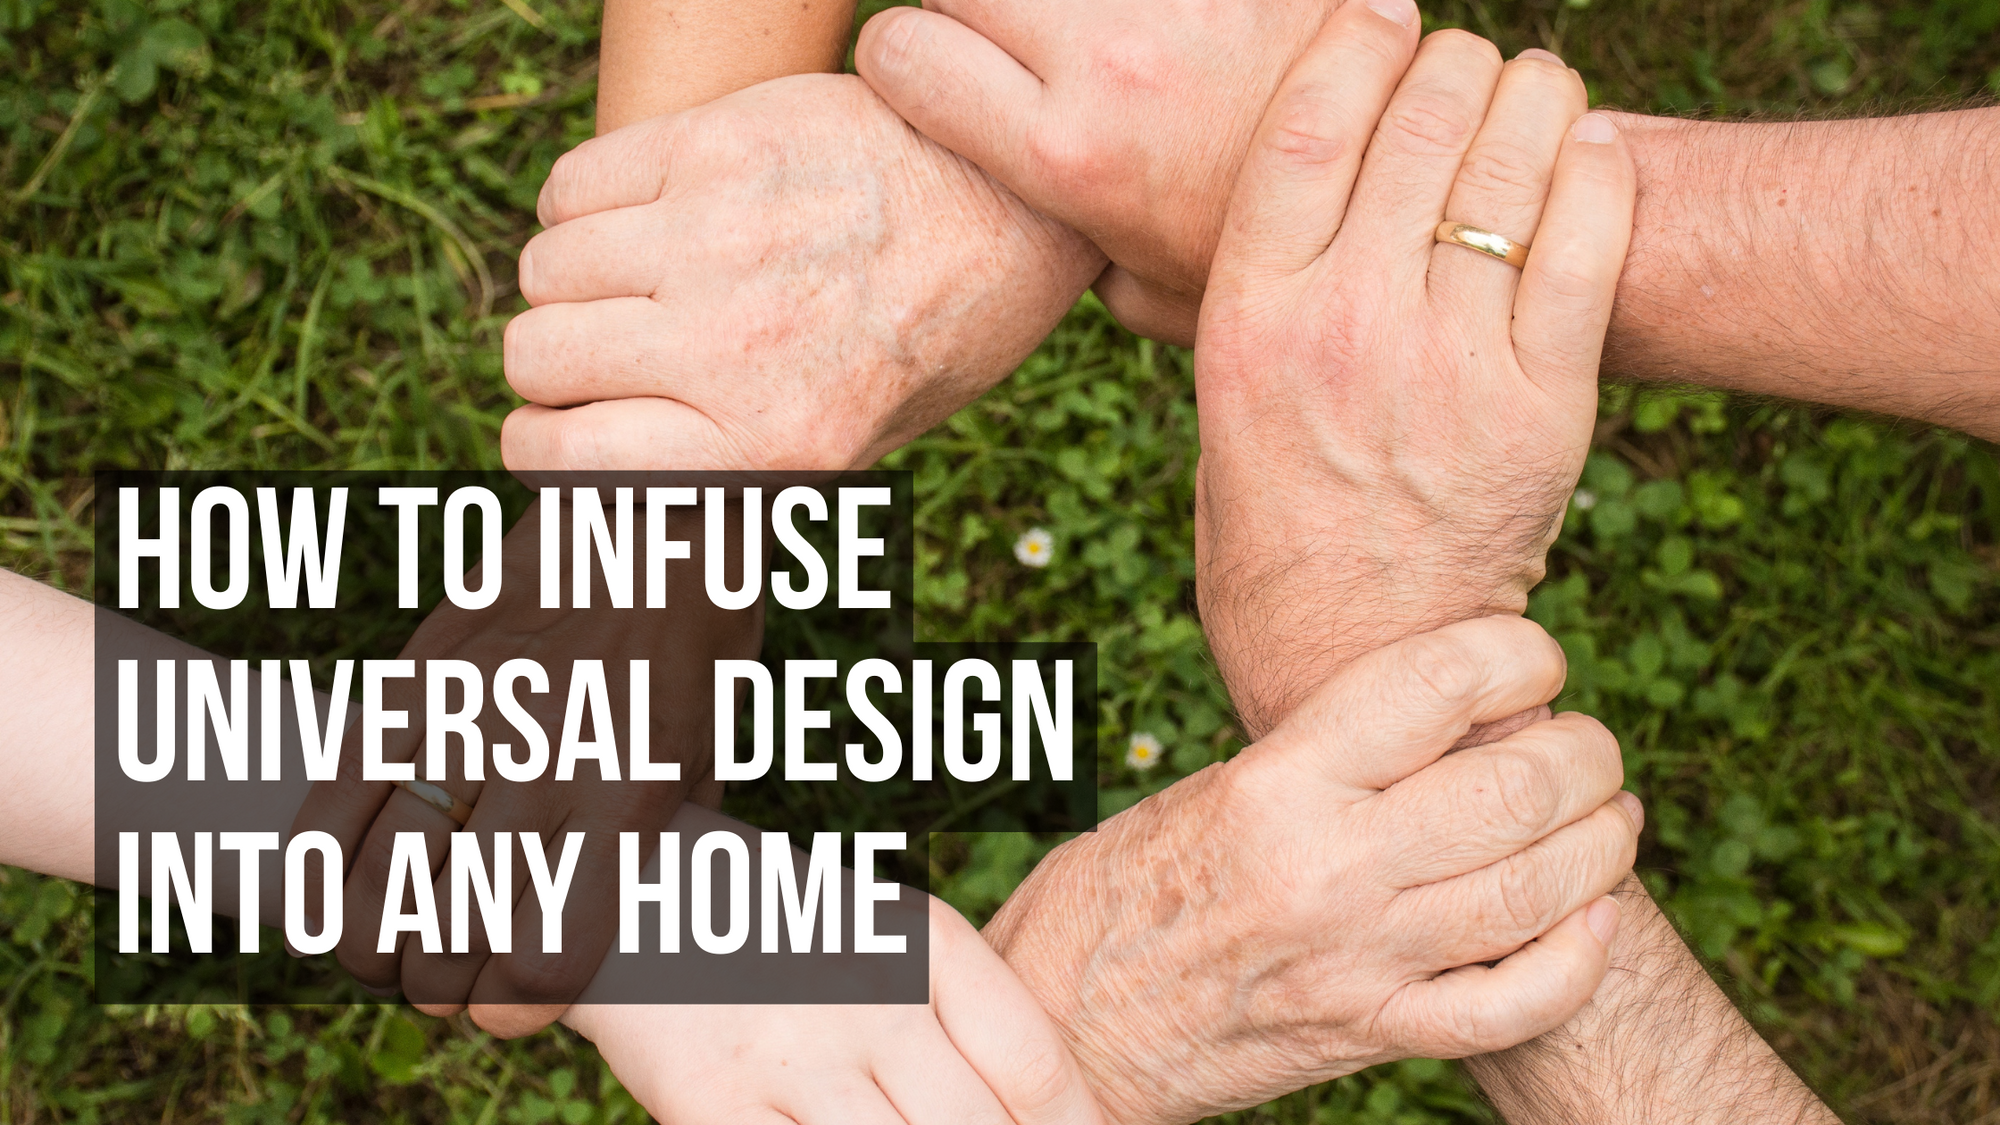 How to Infuse Universal Design Into Any Home